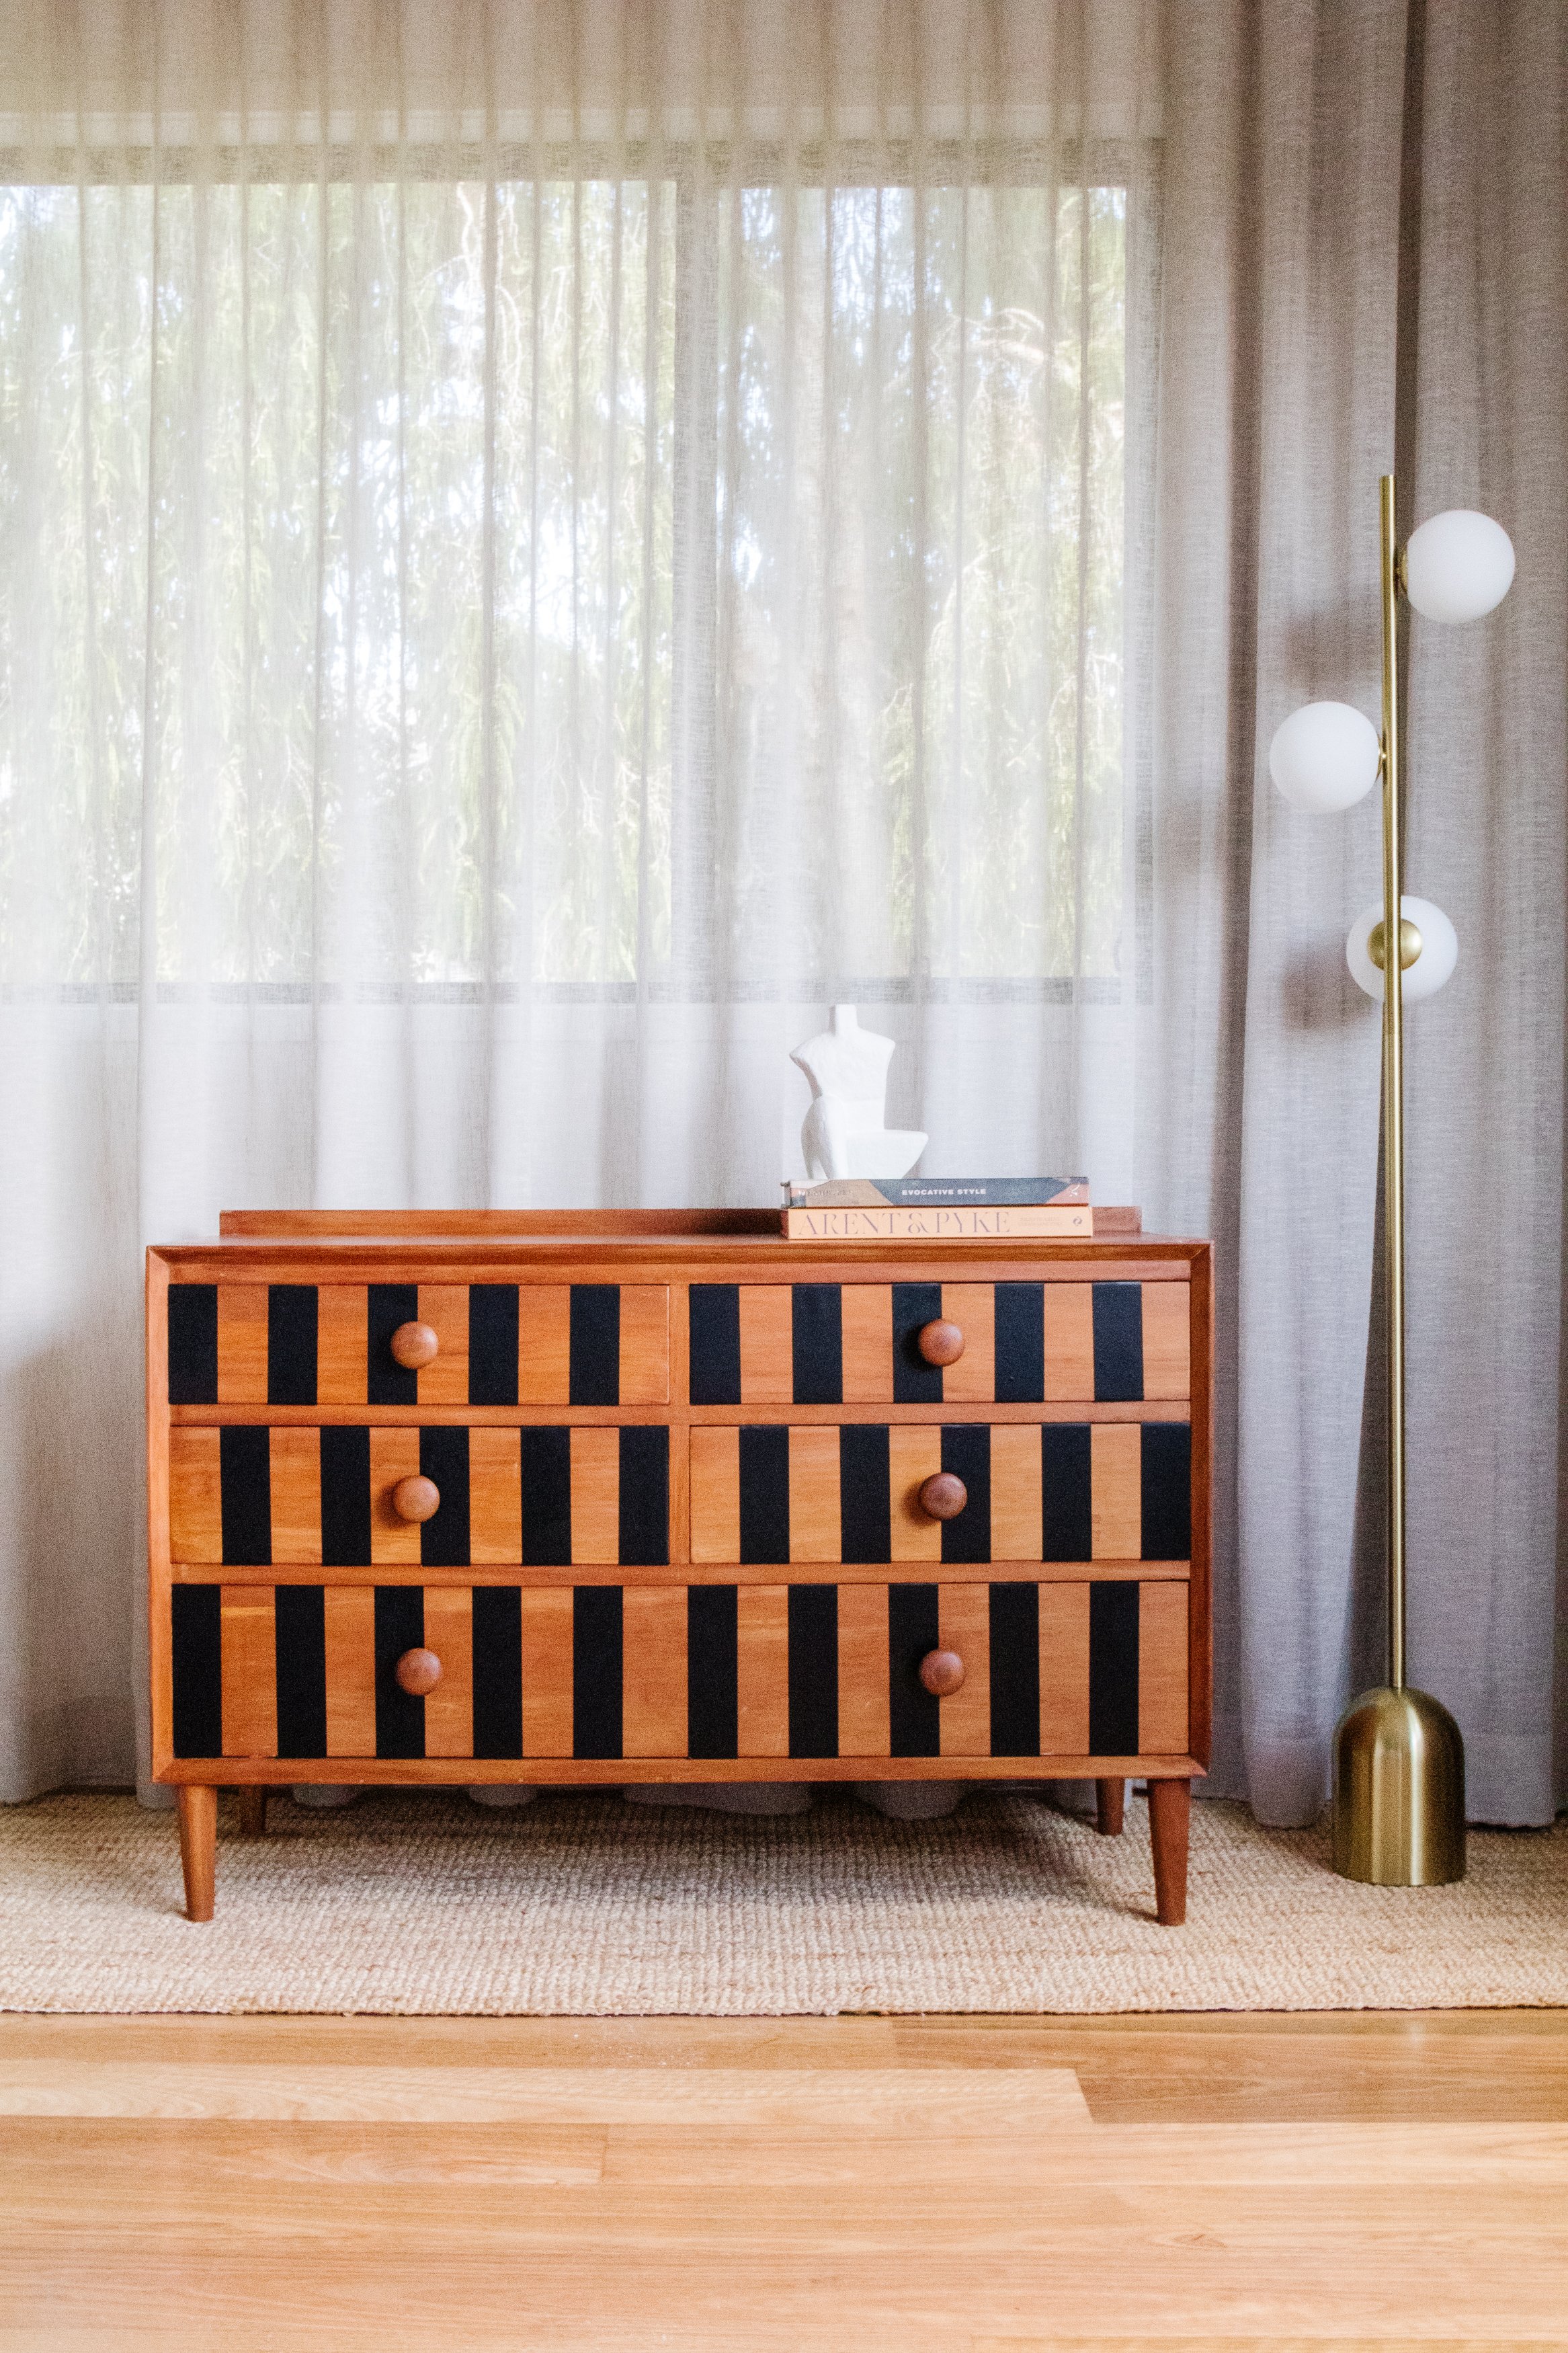 Upcycling A Mid Century Drawers With Cricut__ (1 of 20).jpg